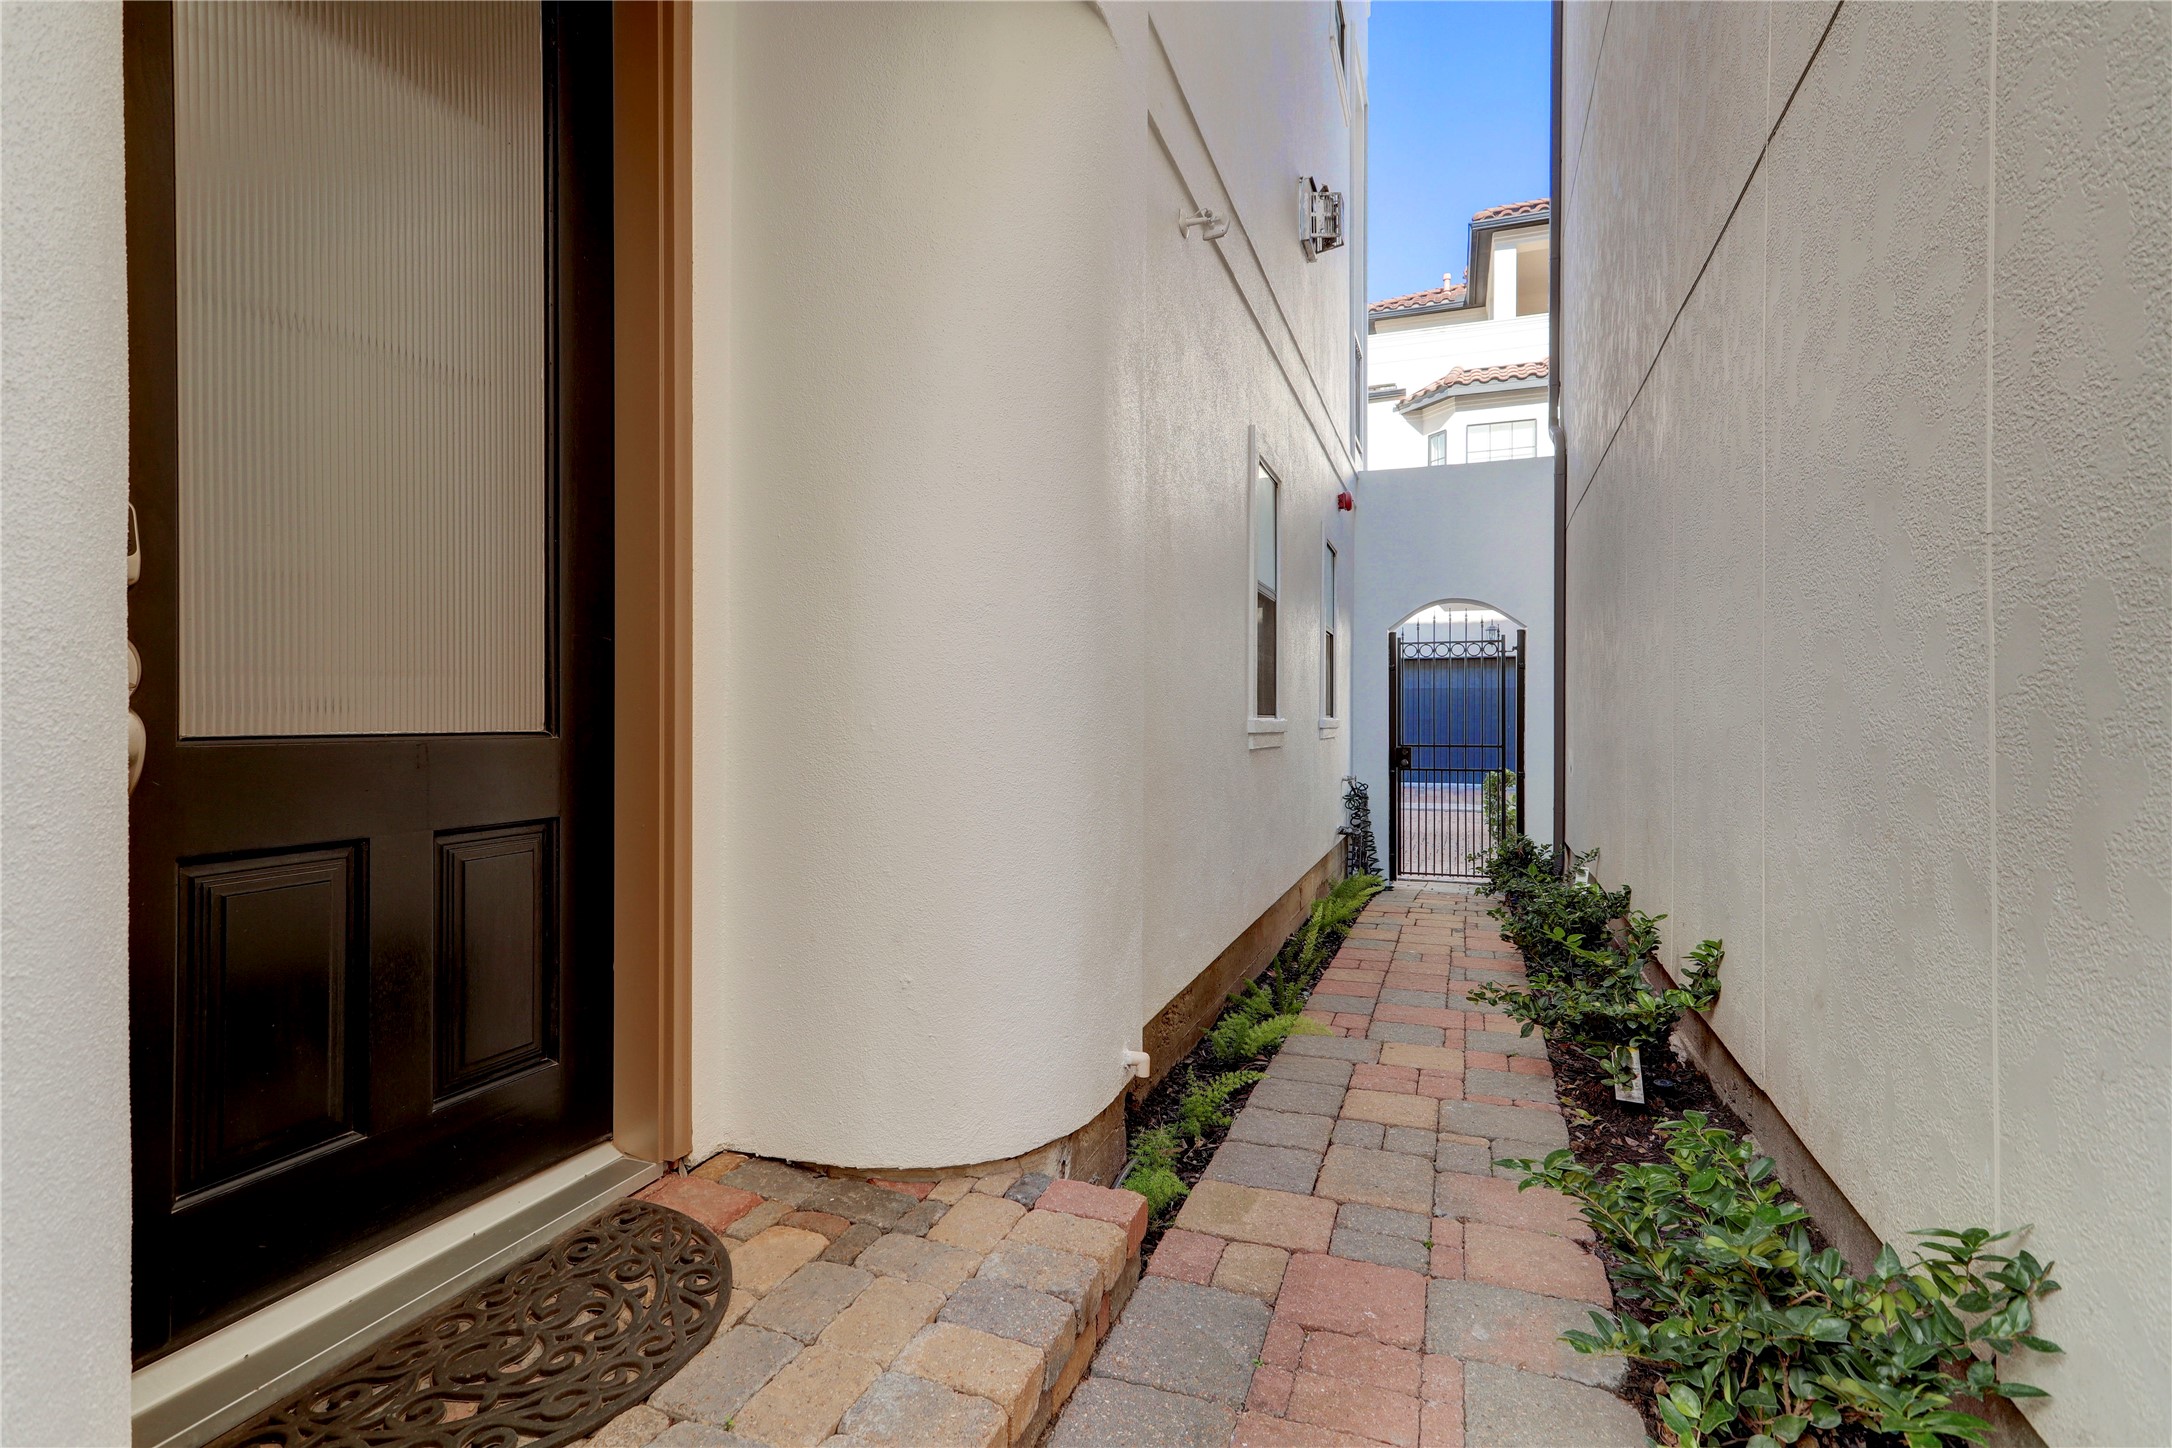 The private walkway to the home is gated, well landscaped and makes for an impressive entry.